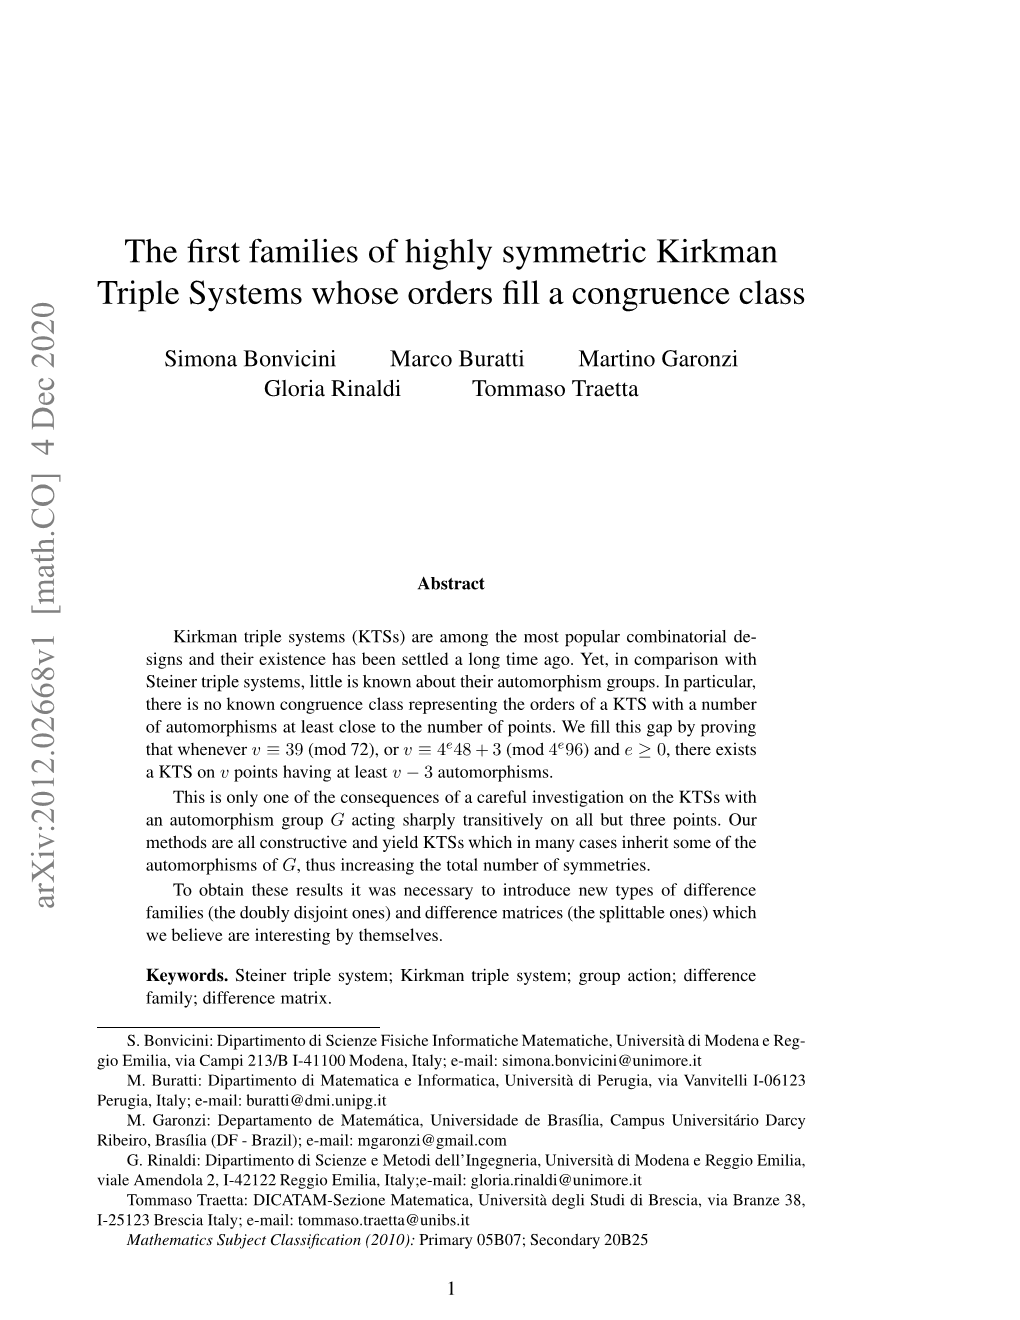 The First Families of Highly Symmetric Kirkman Triple Systems Whose